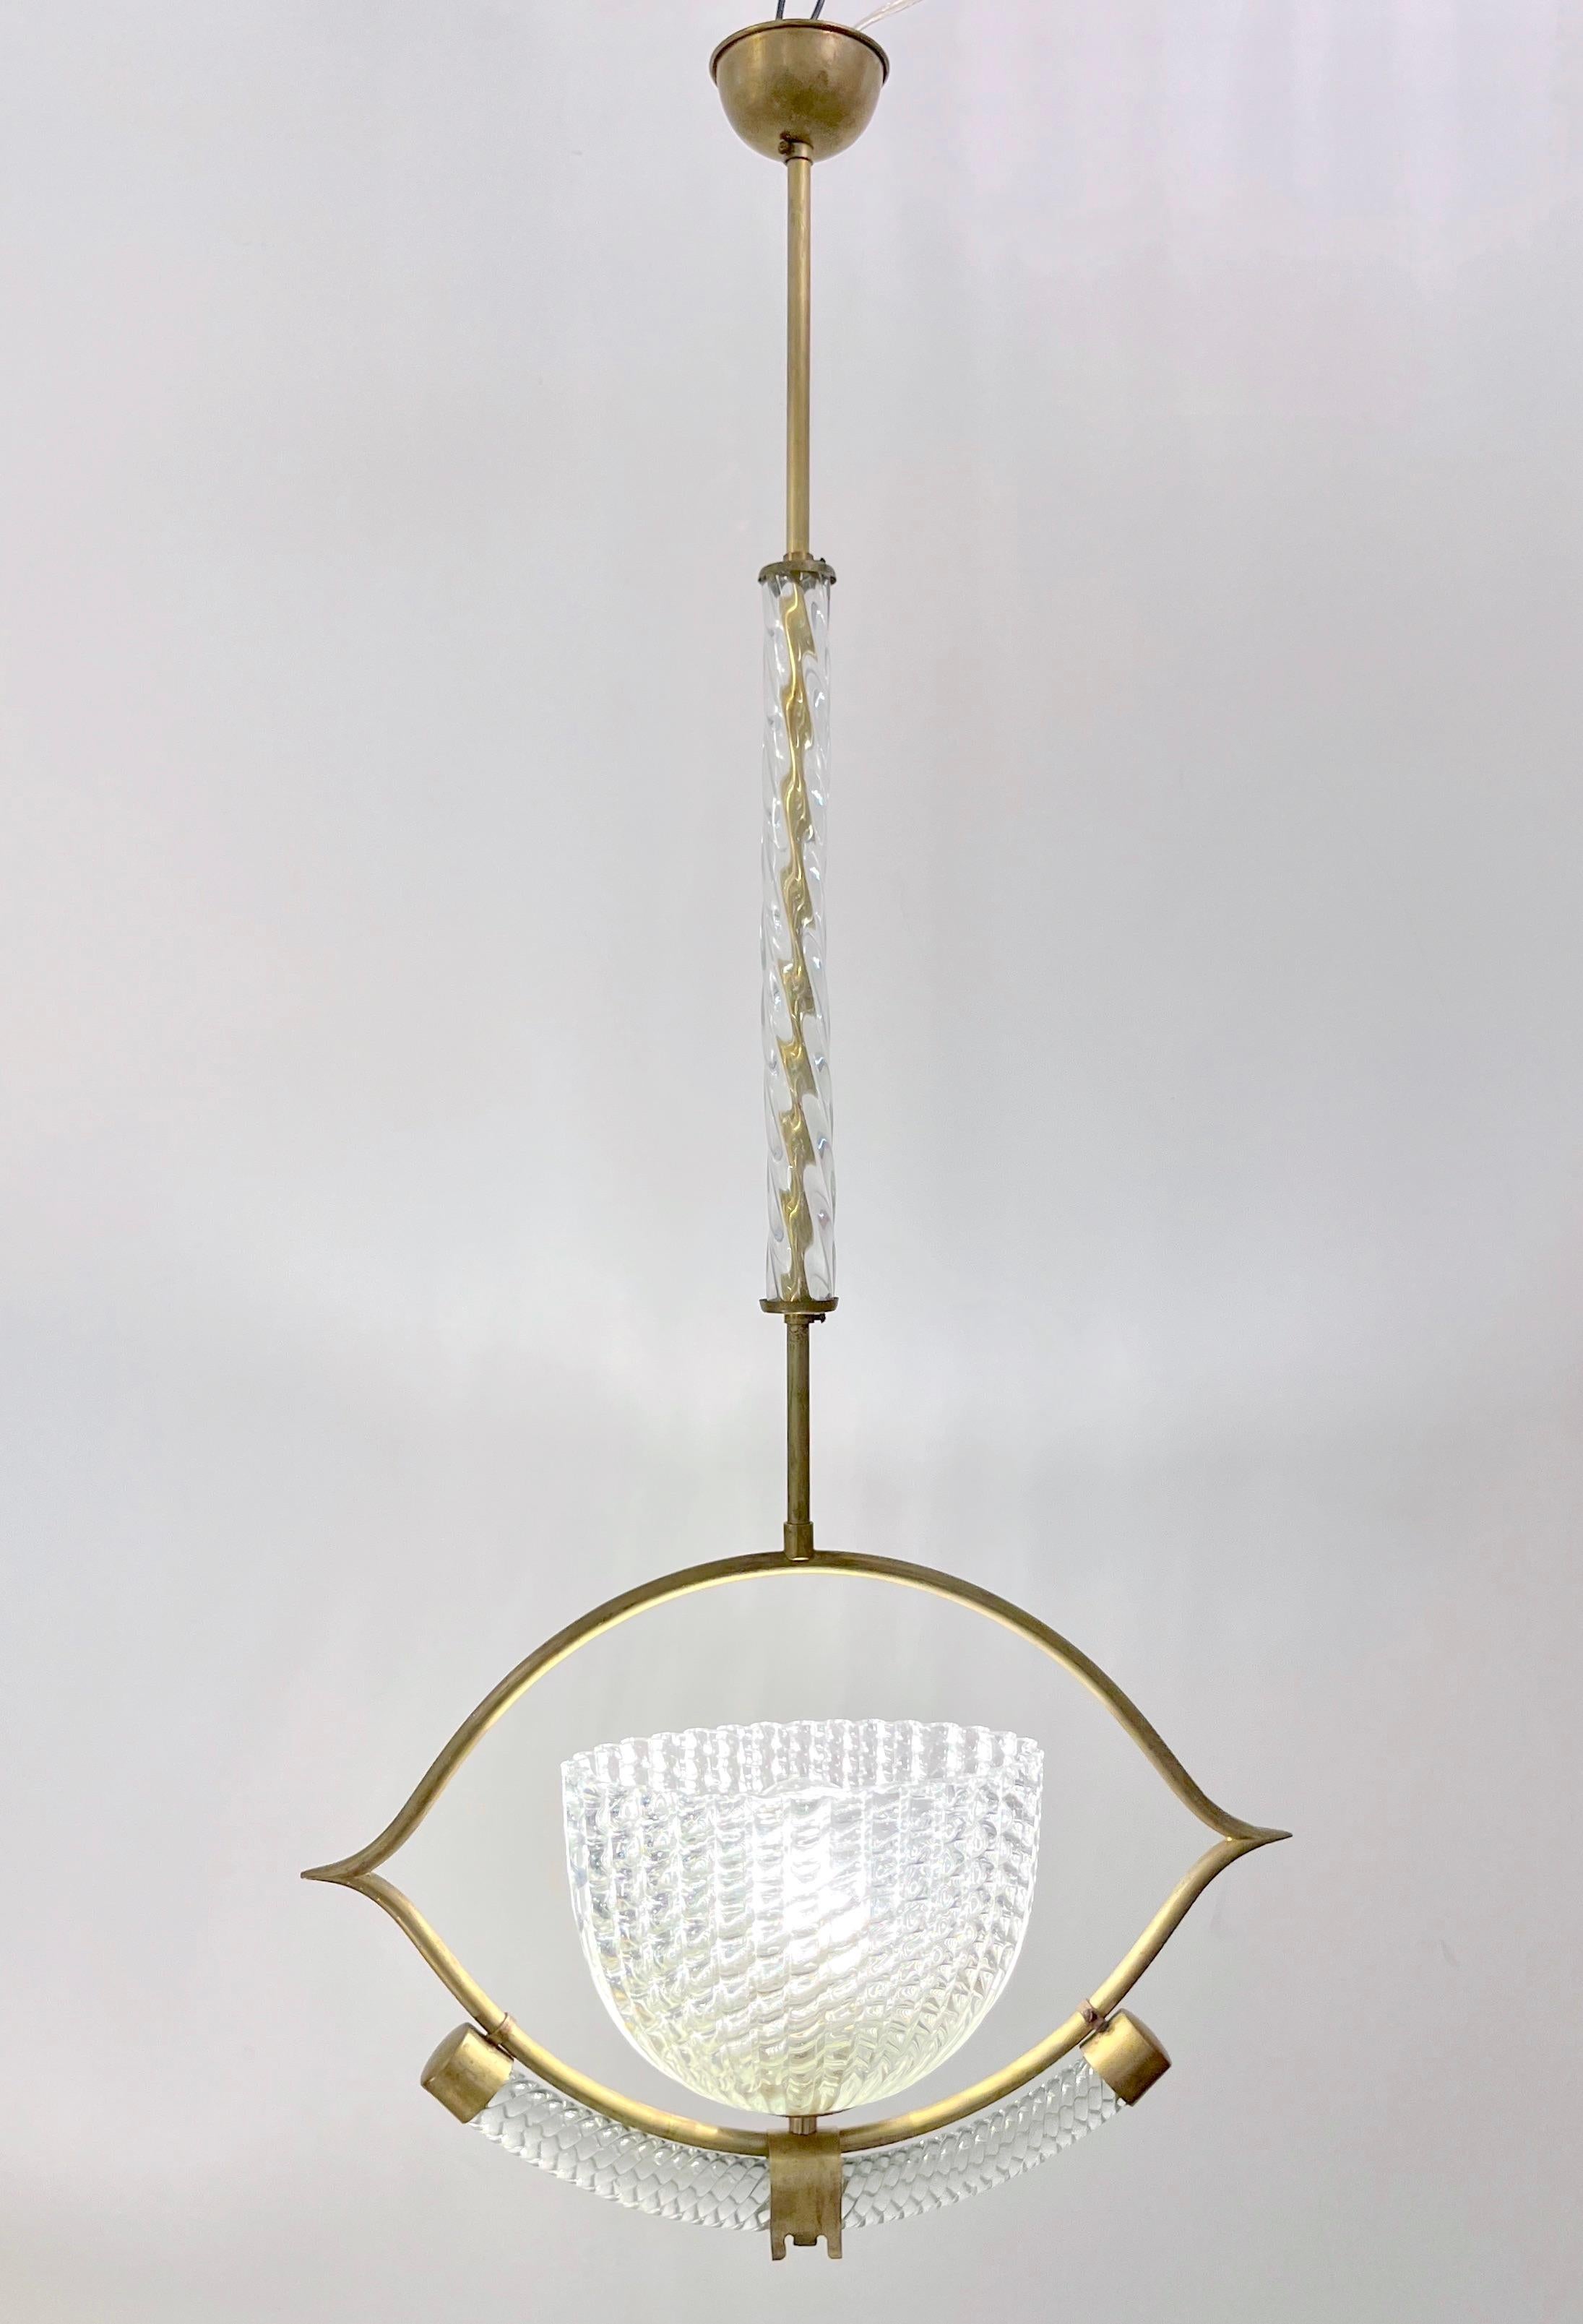 A very elegant antique design by Ercole Barovier, a Venetian Art Deco chandelier of exquisite craftsmanship in blown murano glass, superb original condition. The organic open bowl containing the light, worked with a honeycomb texture typical of